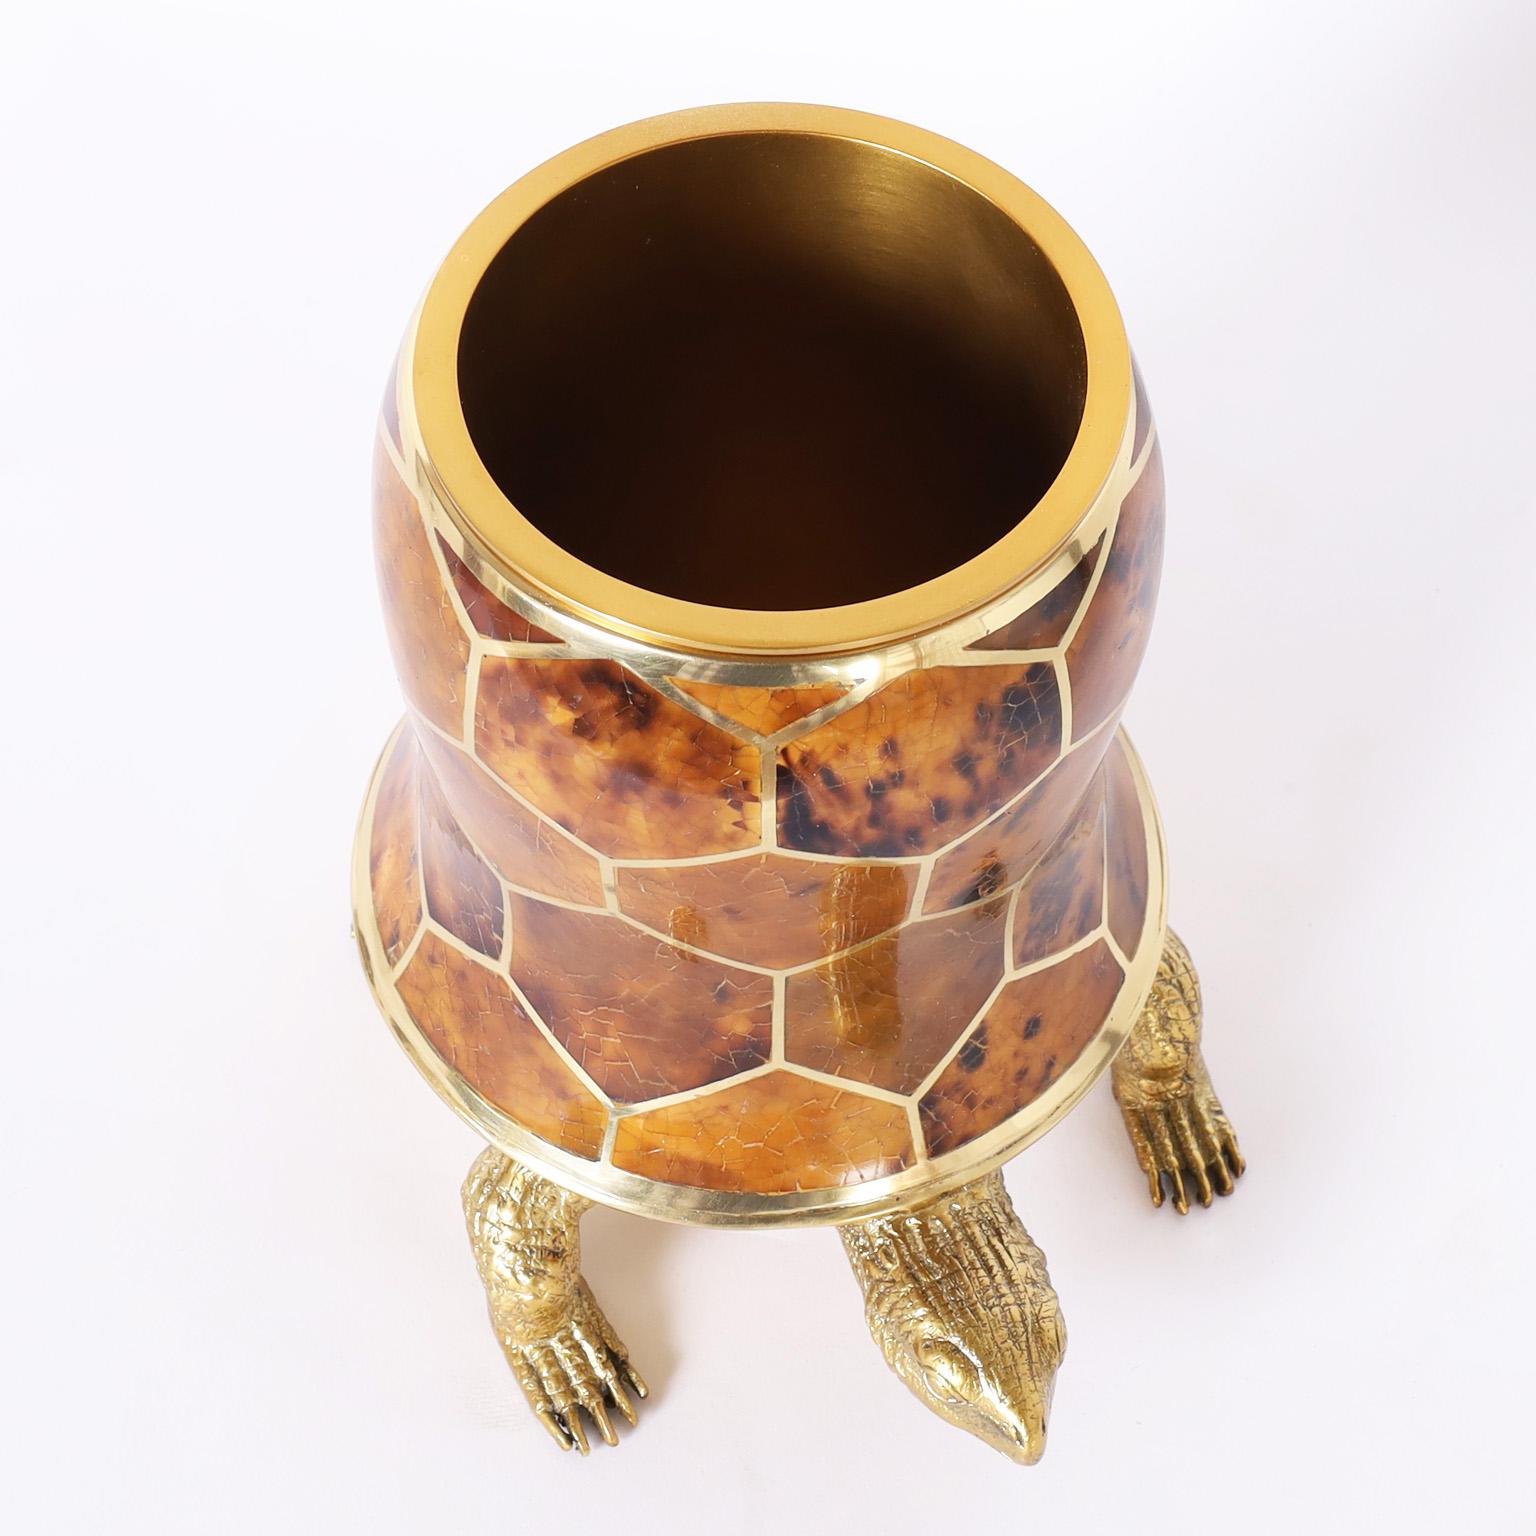 Wine cooler crafted in cast and gilt bronze with a removable insert and featuring a tortoise shell mosaic in a honeycomb design.